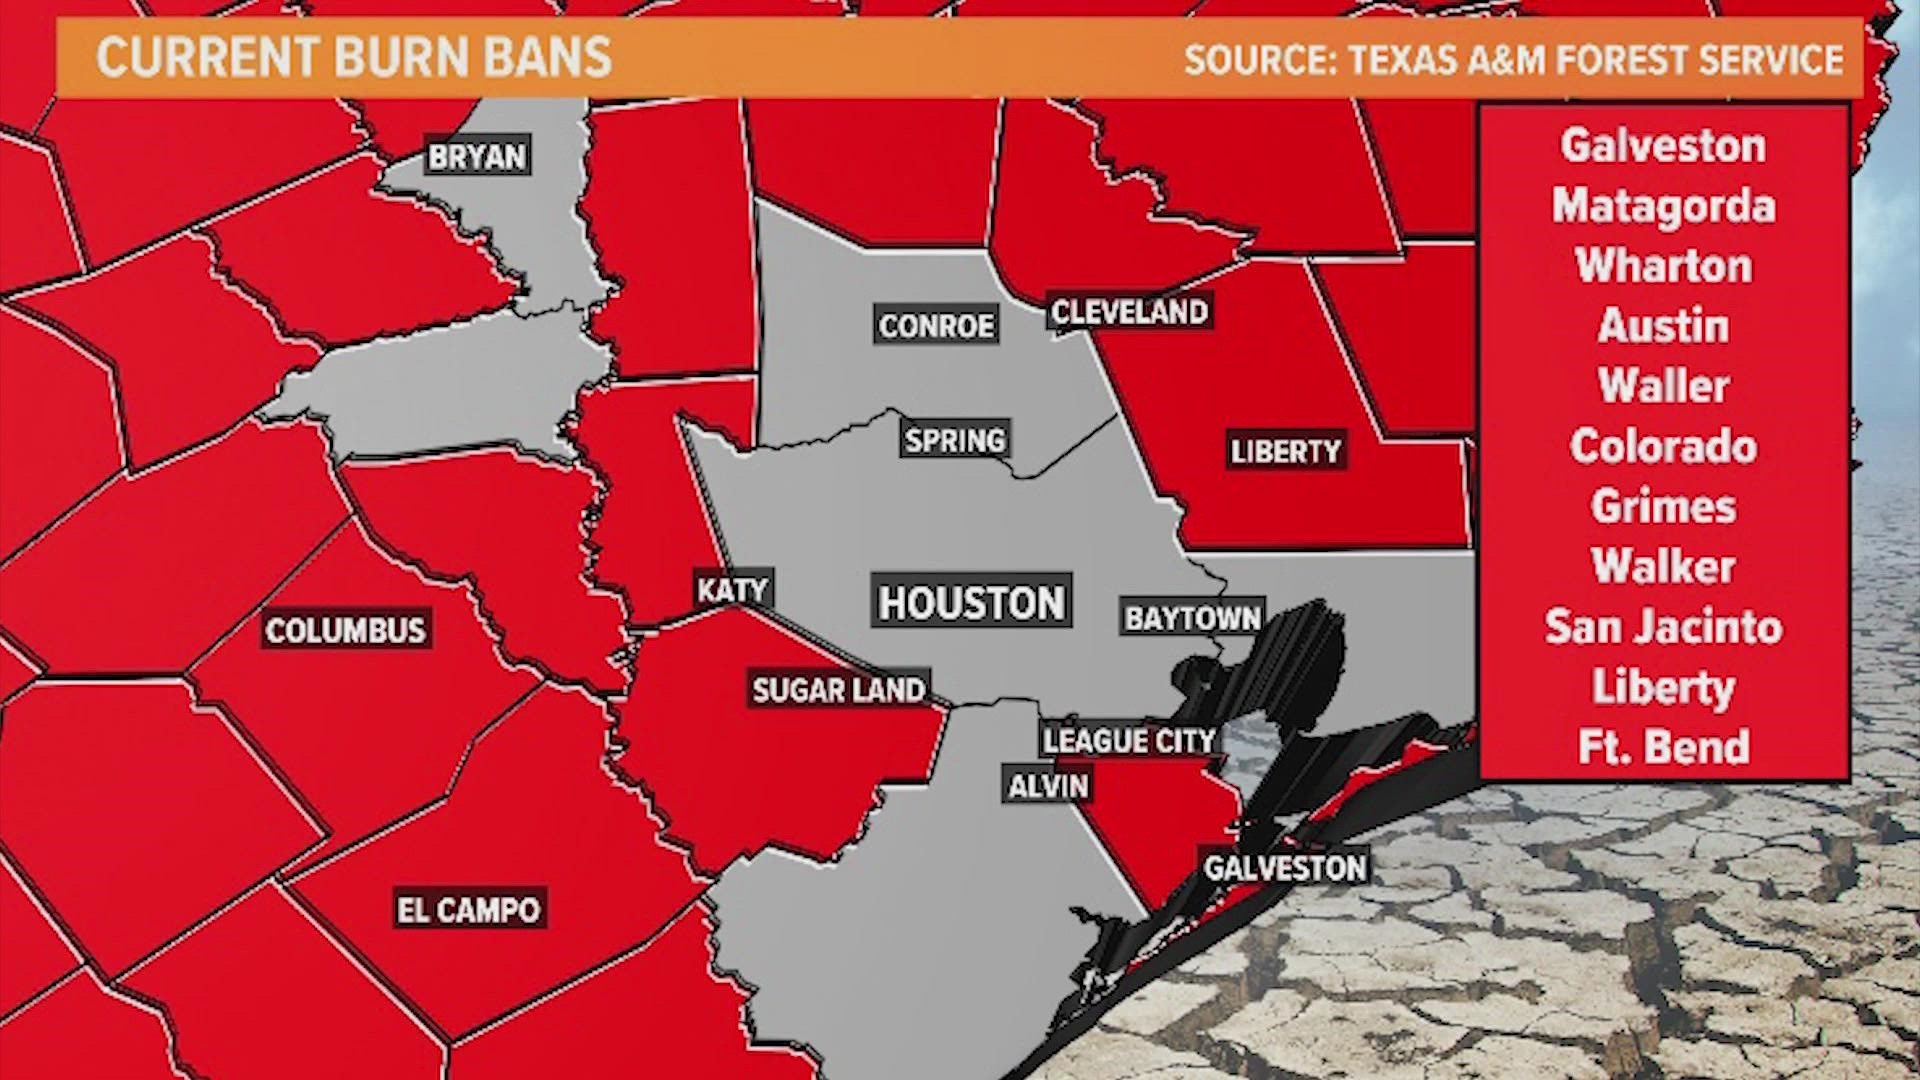 Water conservation measures have been implemented in Houston and Katy, while burn bans are in effect across the Greater Houston area.